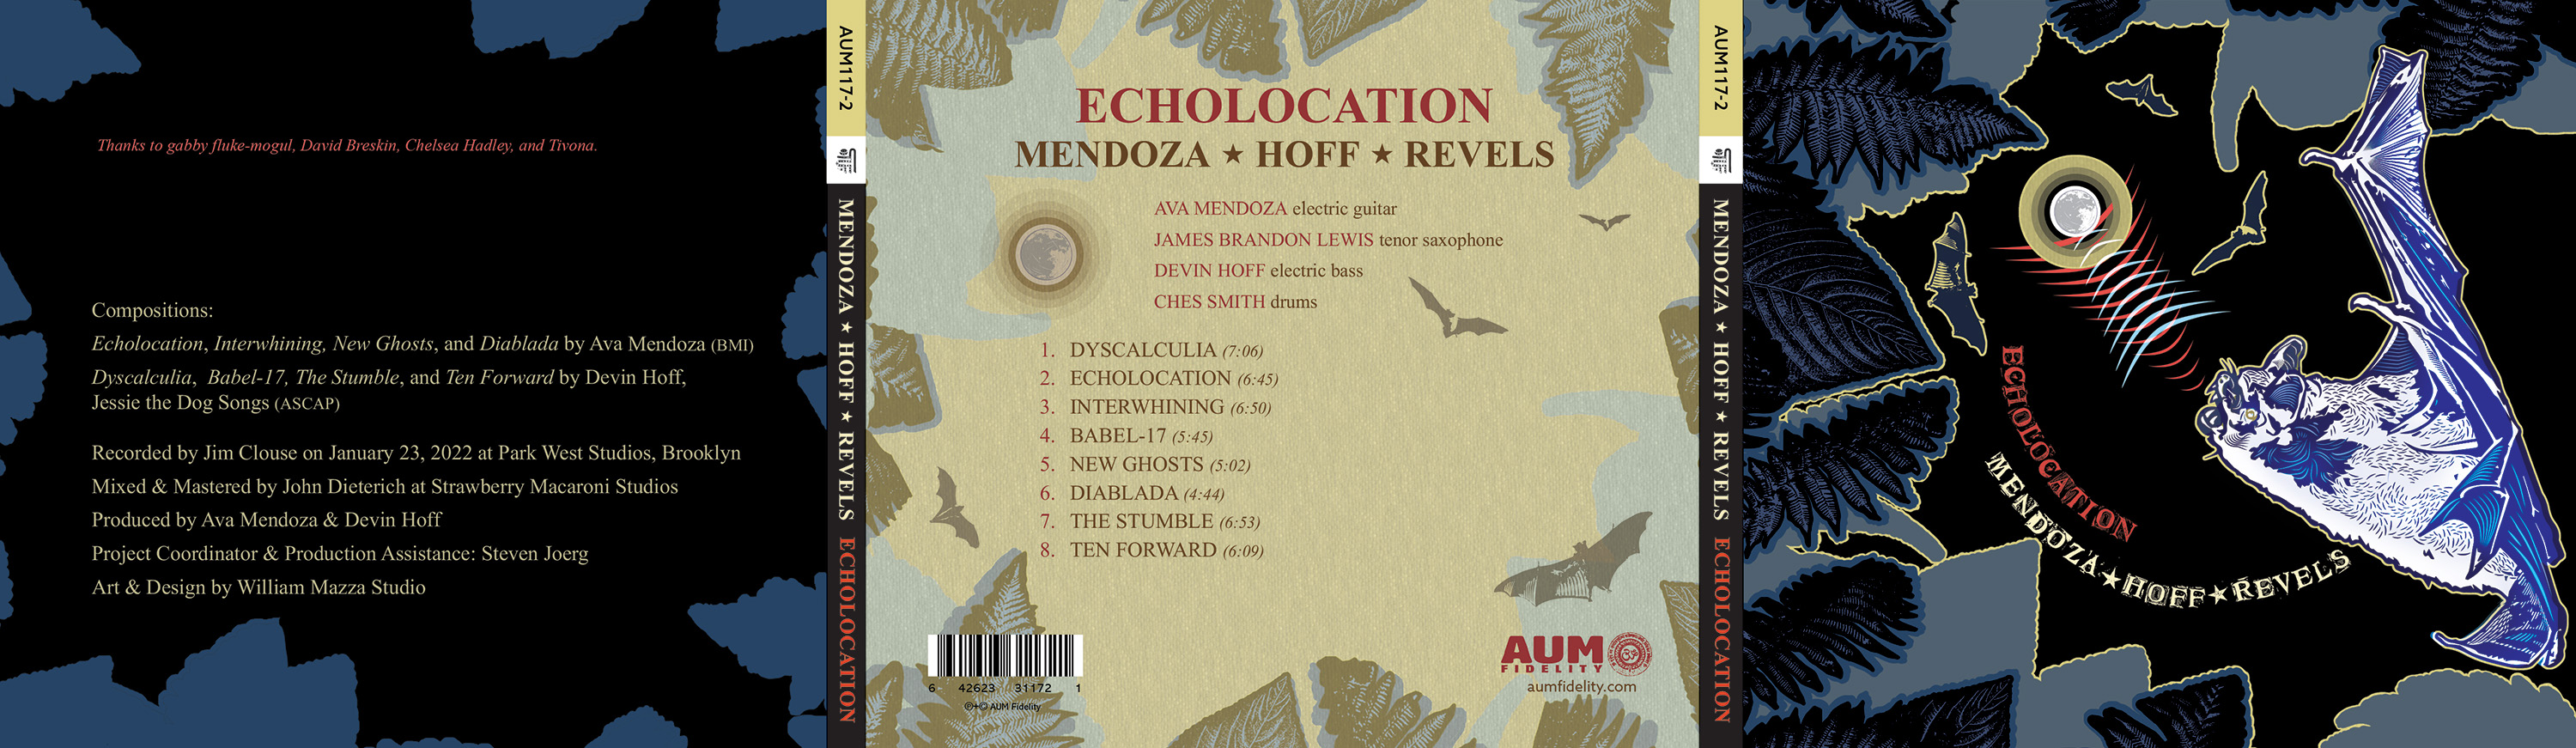 cd cover and outside panels for Echolocation by Mendoza Hoff Revels